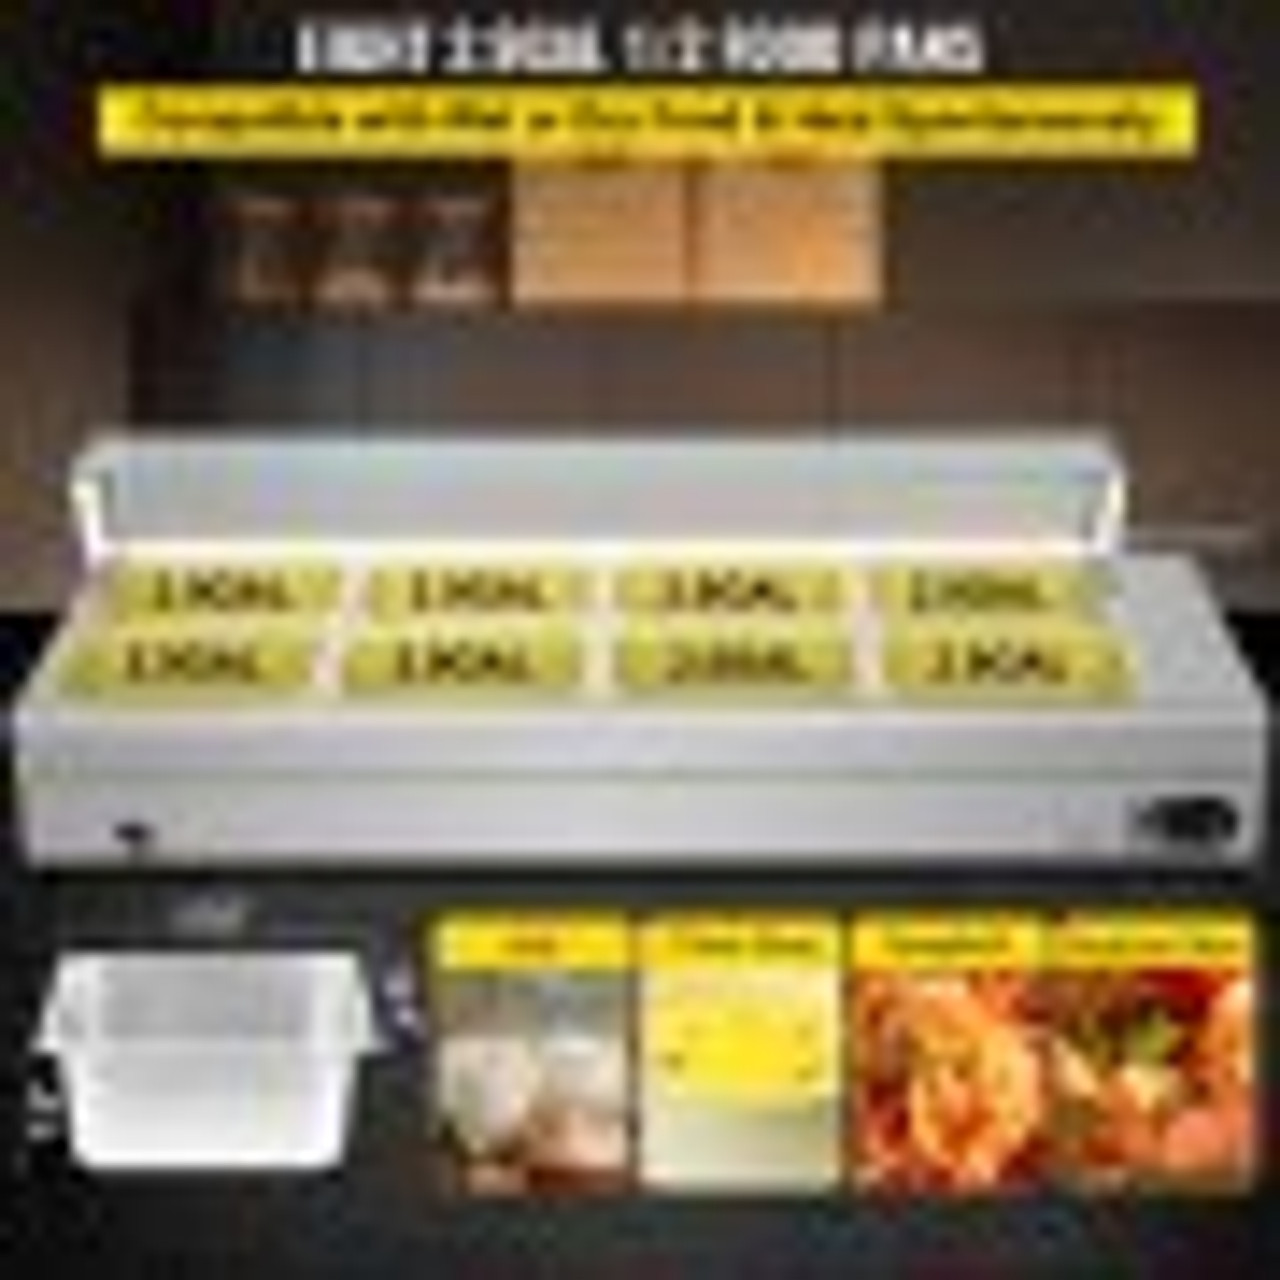 110V Bain Marie Food Warmer 8 Pan x 1/2 GN,Food Grade Stainelss Steel Commercial Food Steam Table 6-Inch Deep, 1500W Electric Countertop Food Warmer 88 Quart with Tempered Glass Shield